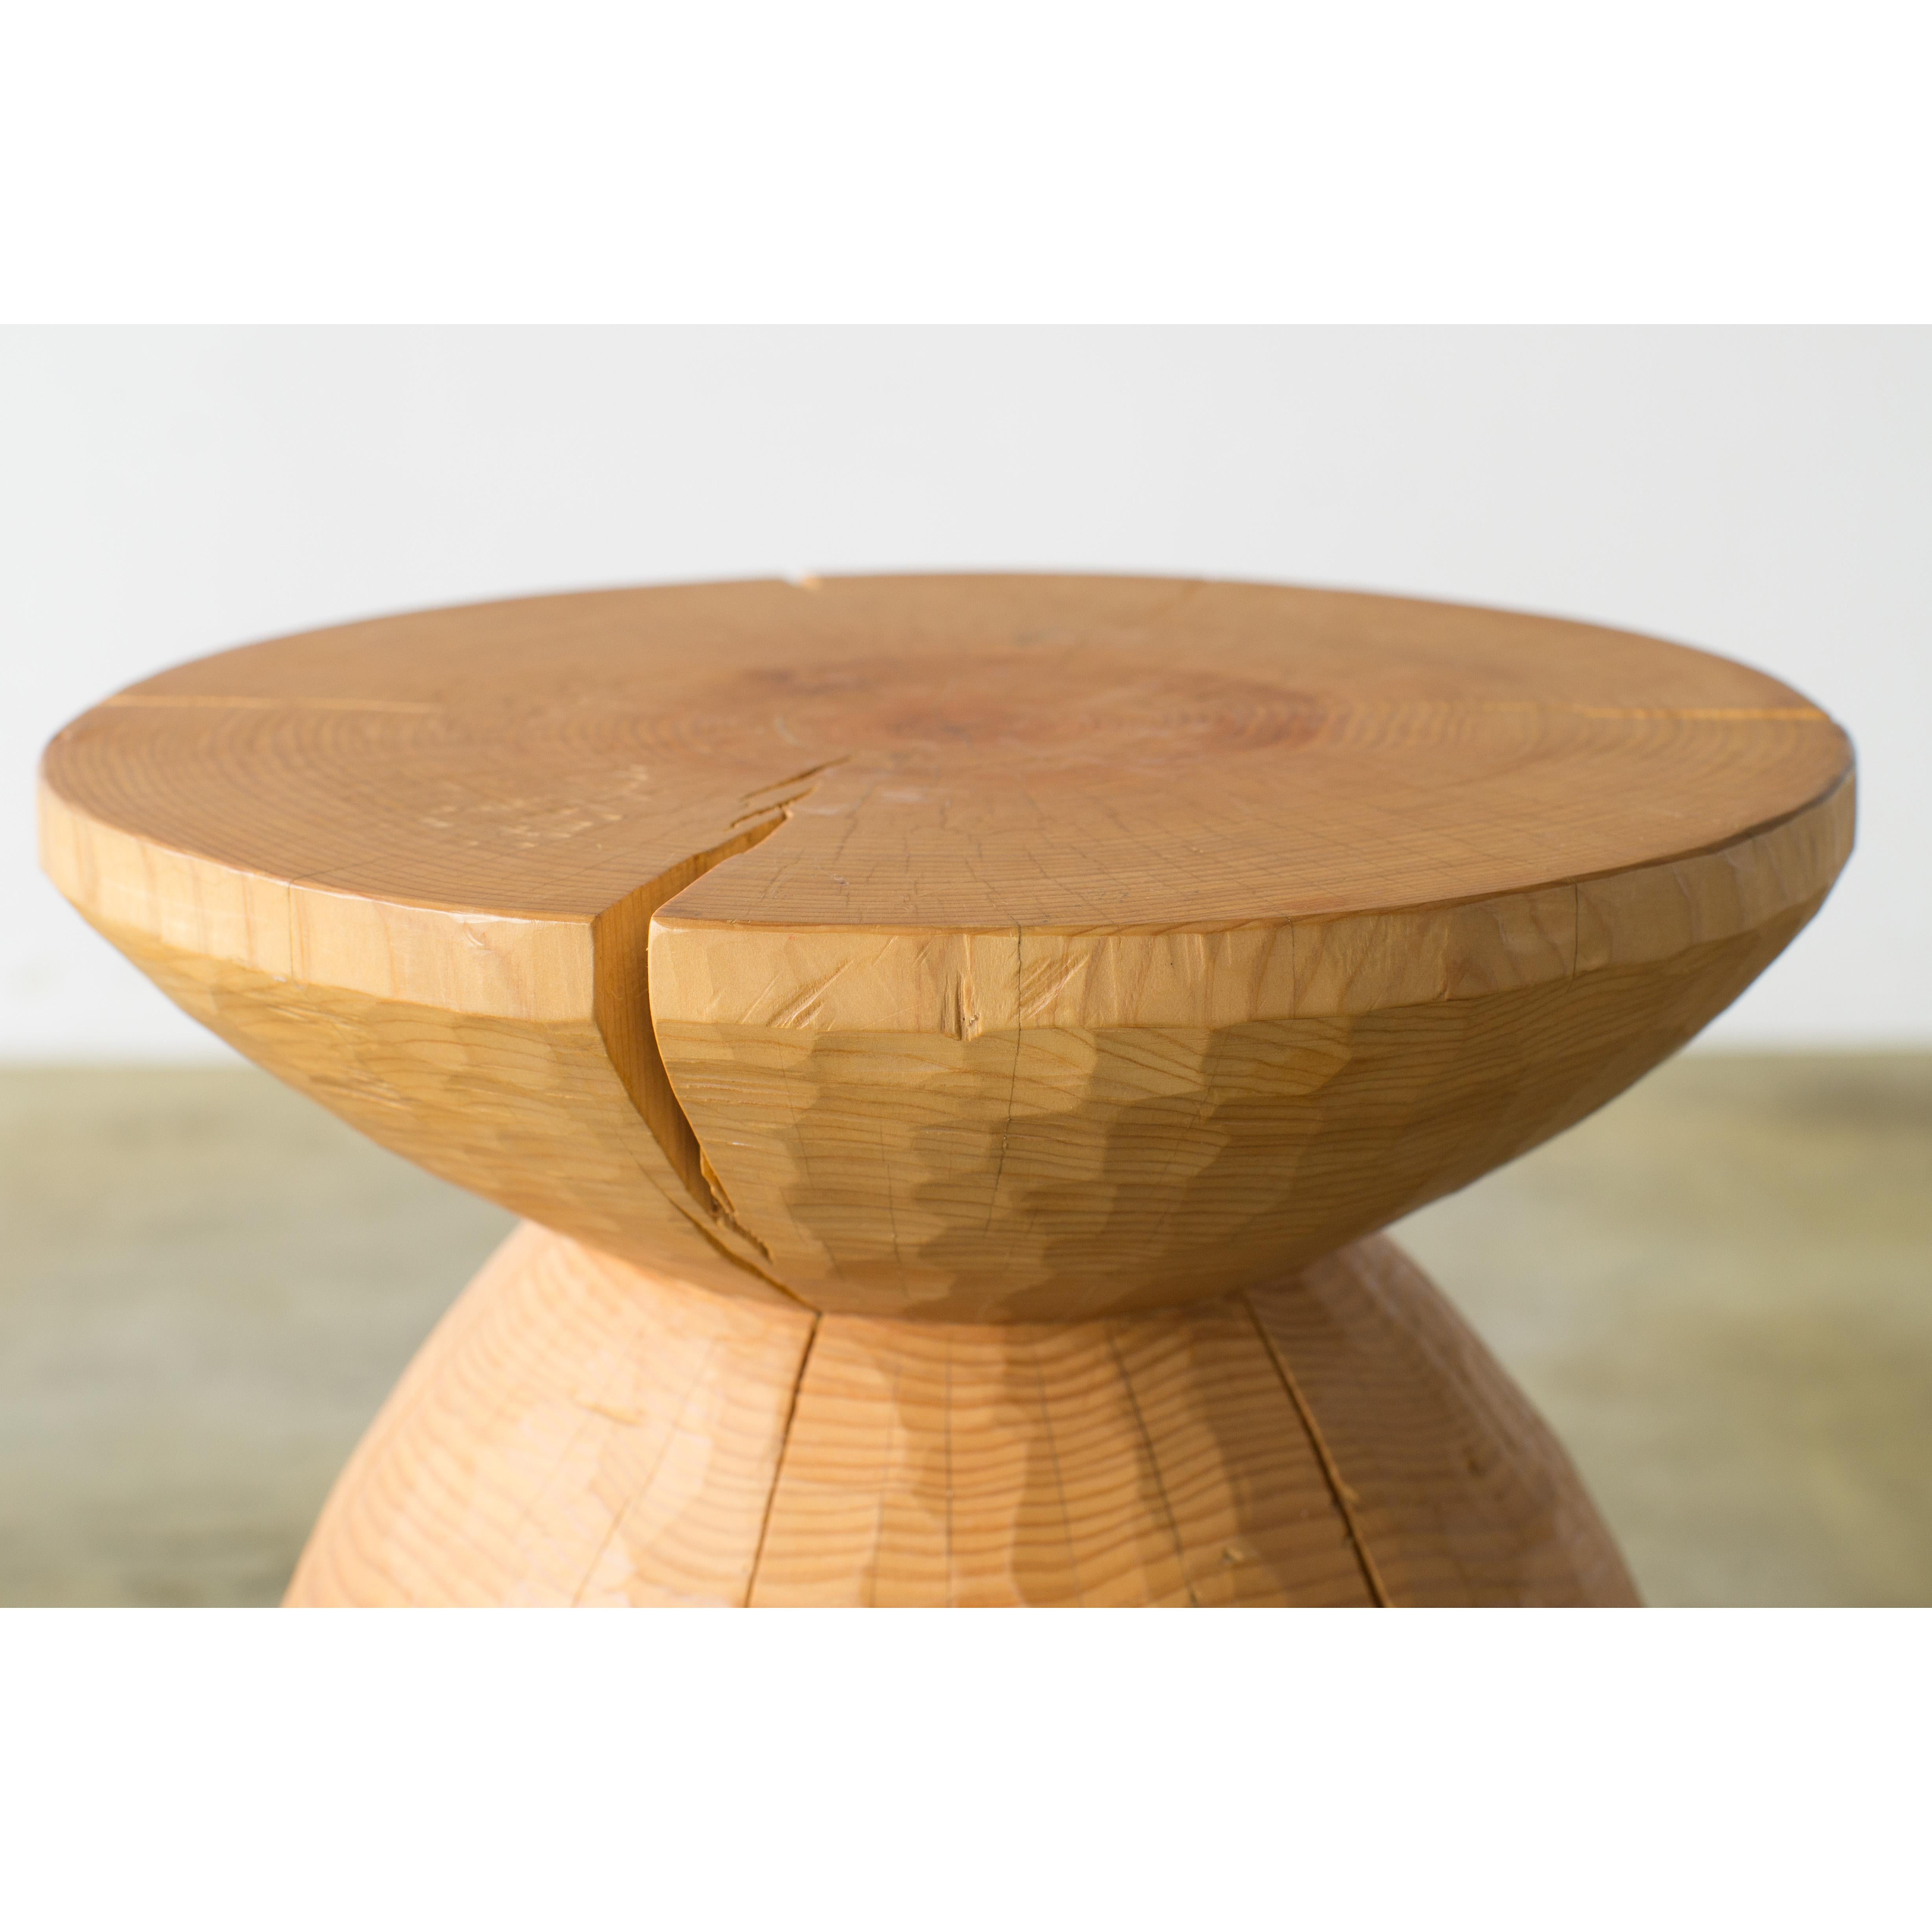 Contemporary Hiroyuki Nishimura and Zougei Furniture Sculptural Stool 3 Tribal Glamping For Sale